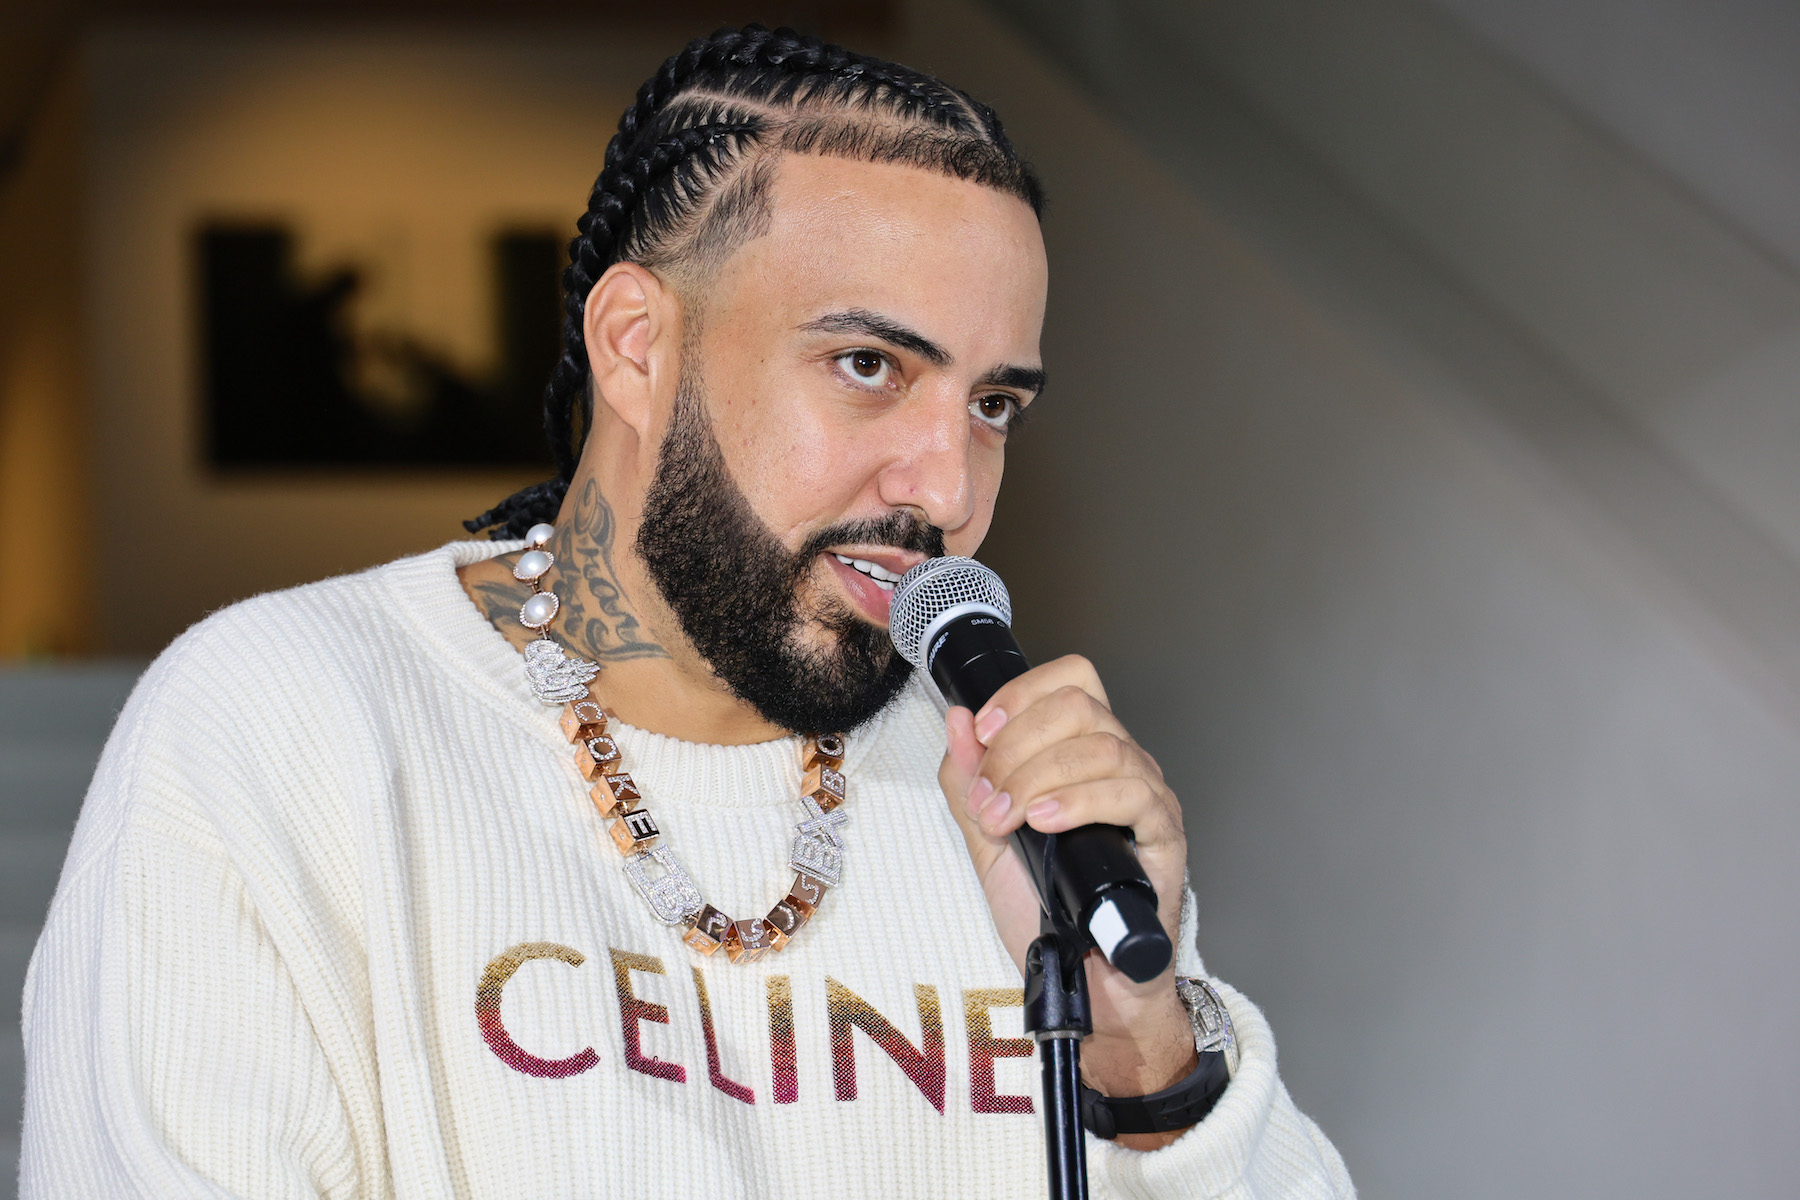 French Montana, whose music video shoot in Miami was the location of a shooting, wearing a white shirt and speaking into a microphone